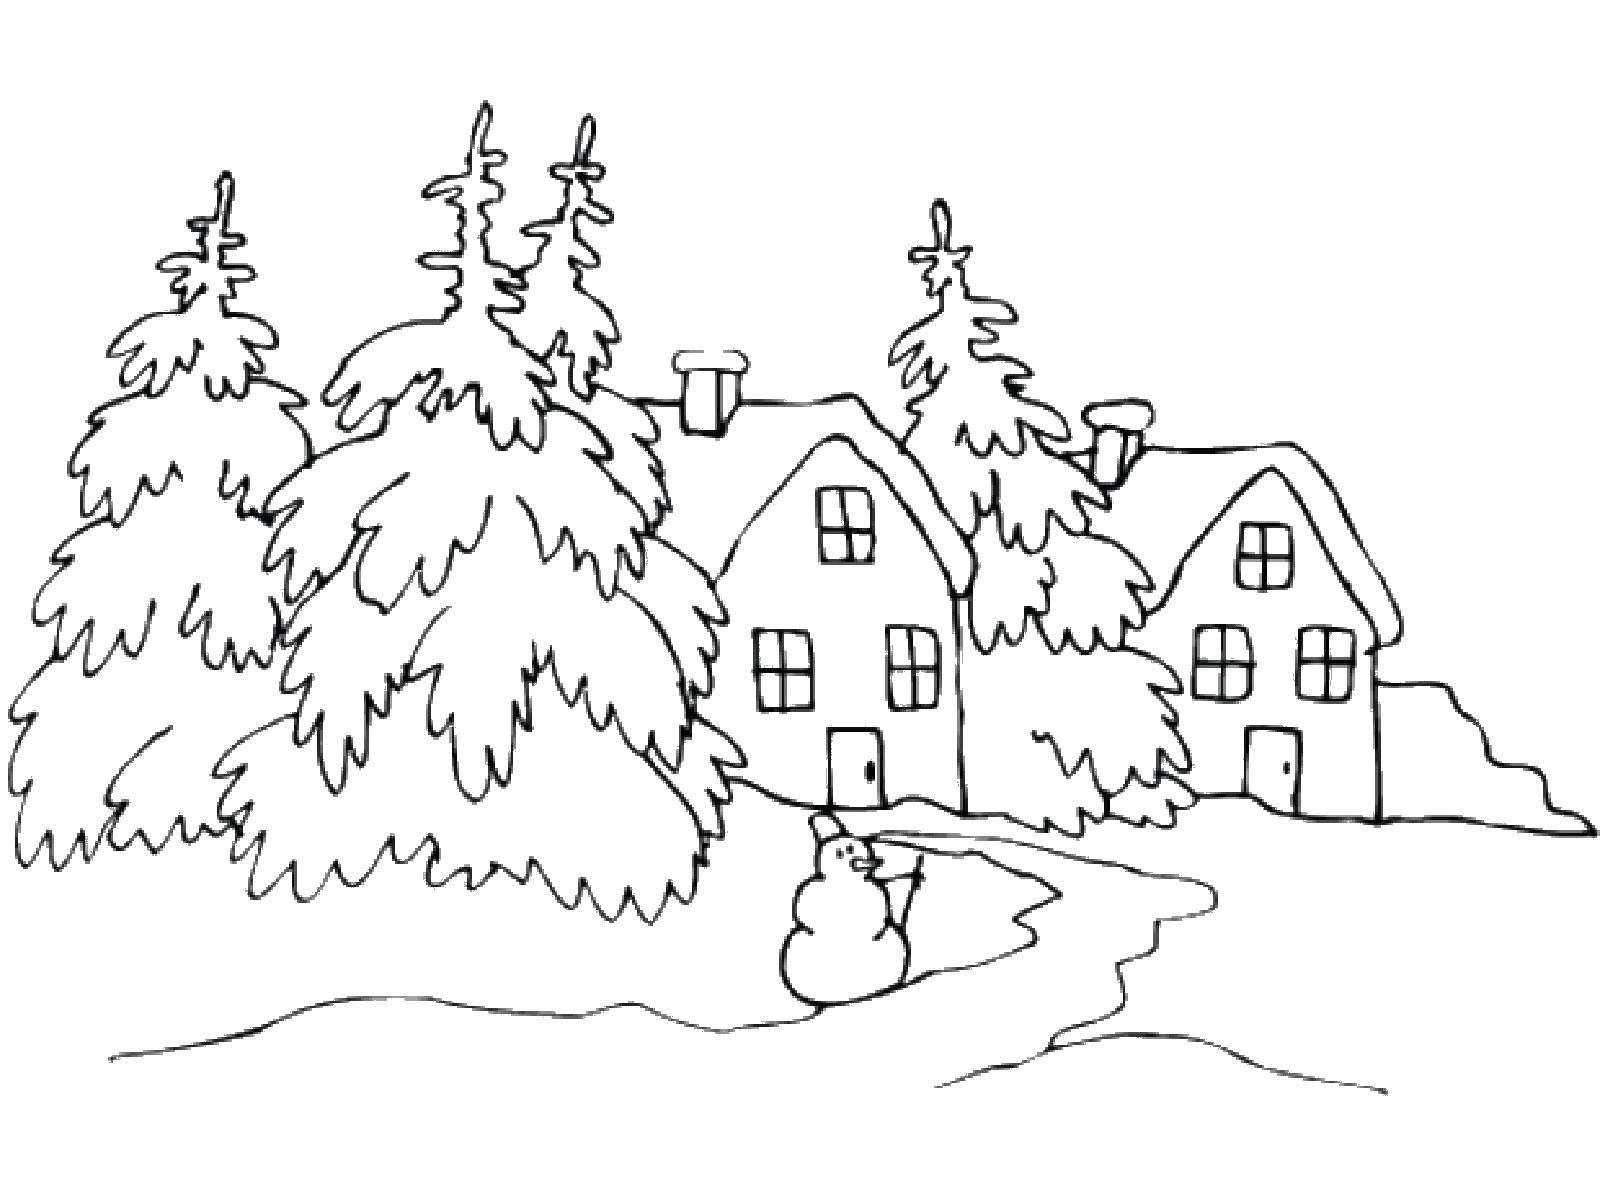 Coloring Snowman in front of houses. Category snow. Tags:  snowman, winter.